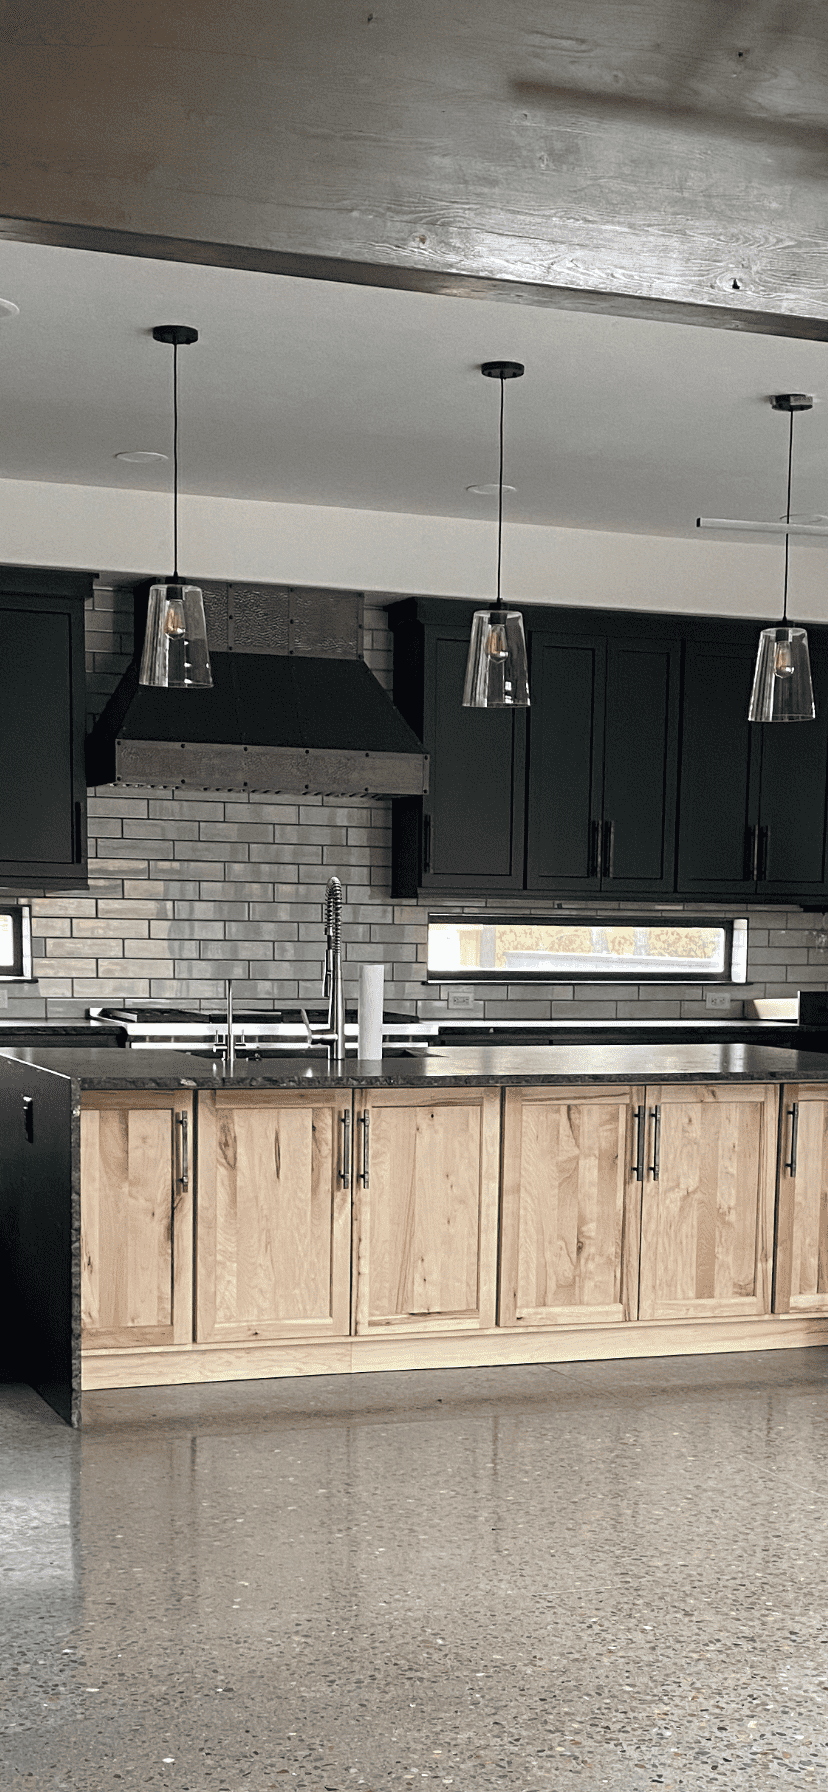 CopperSmith MX3 Antique Copper Kitchen Range Hood in an industrial and elegant style kitchen with black and wood cabinets dark tile backsplash and black countertops